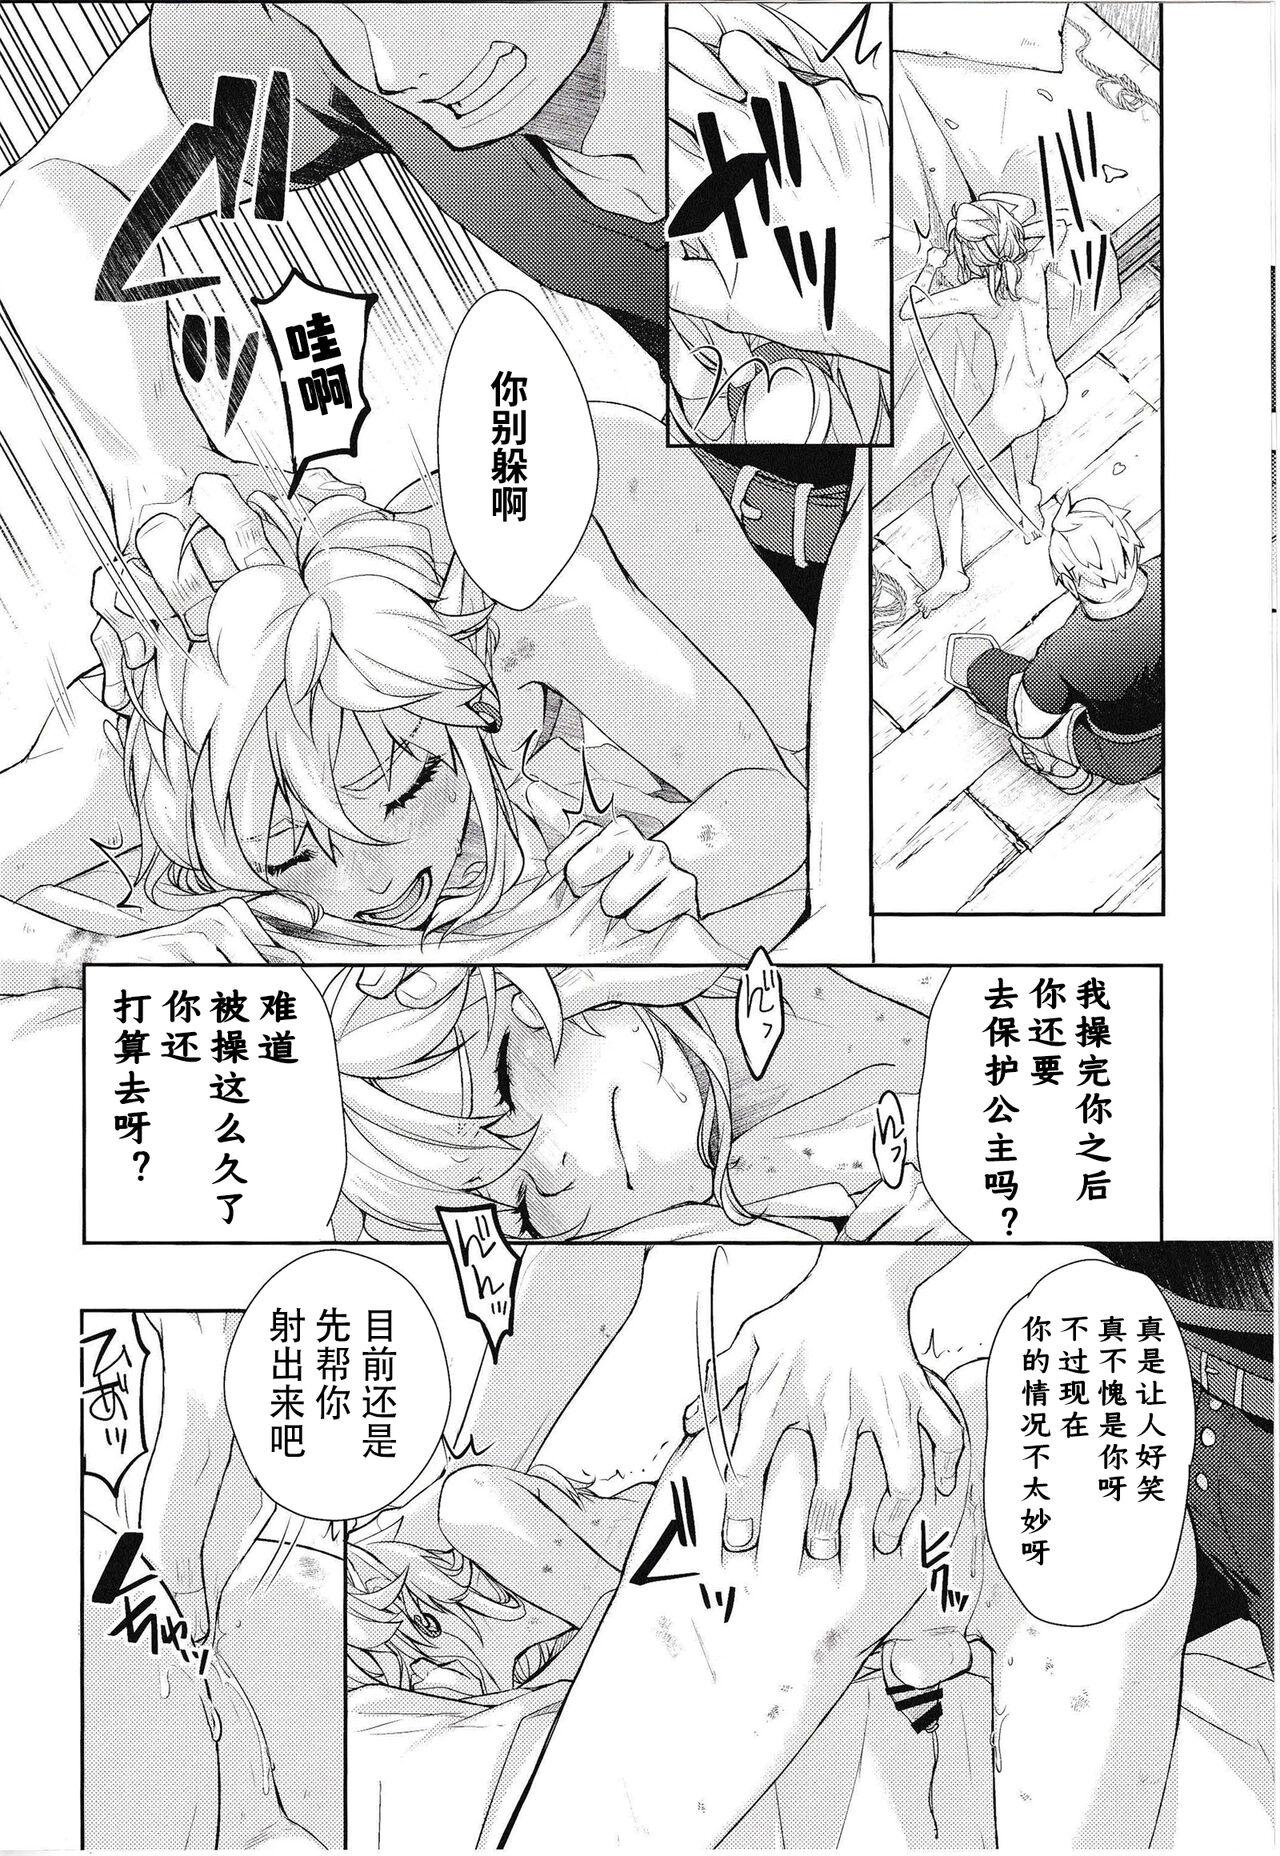 Sapphic Erotica 思い出してはいけない記憶 - The legend of zelda Gay Pawnshop - Page 7